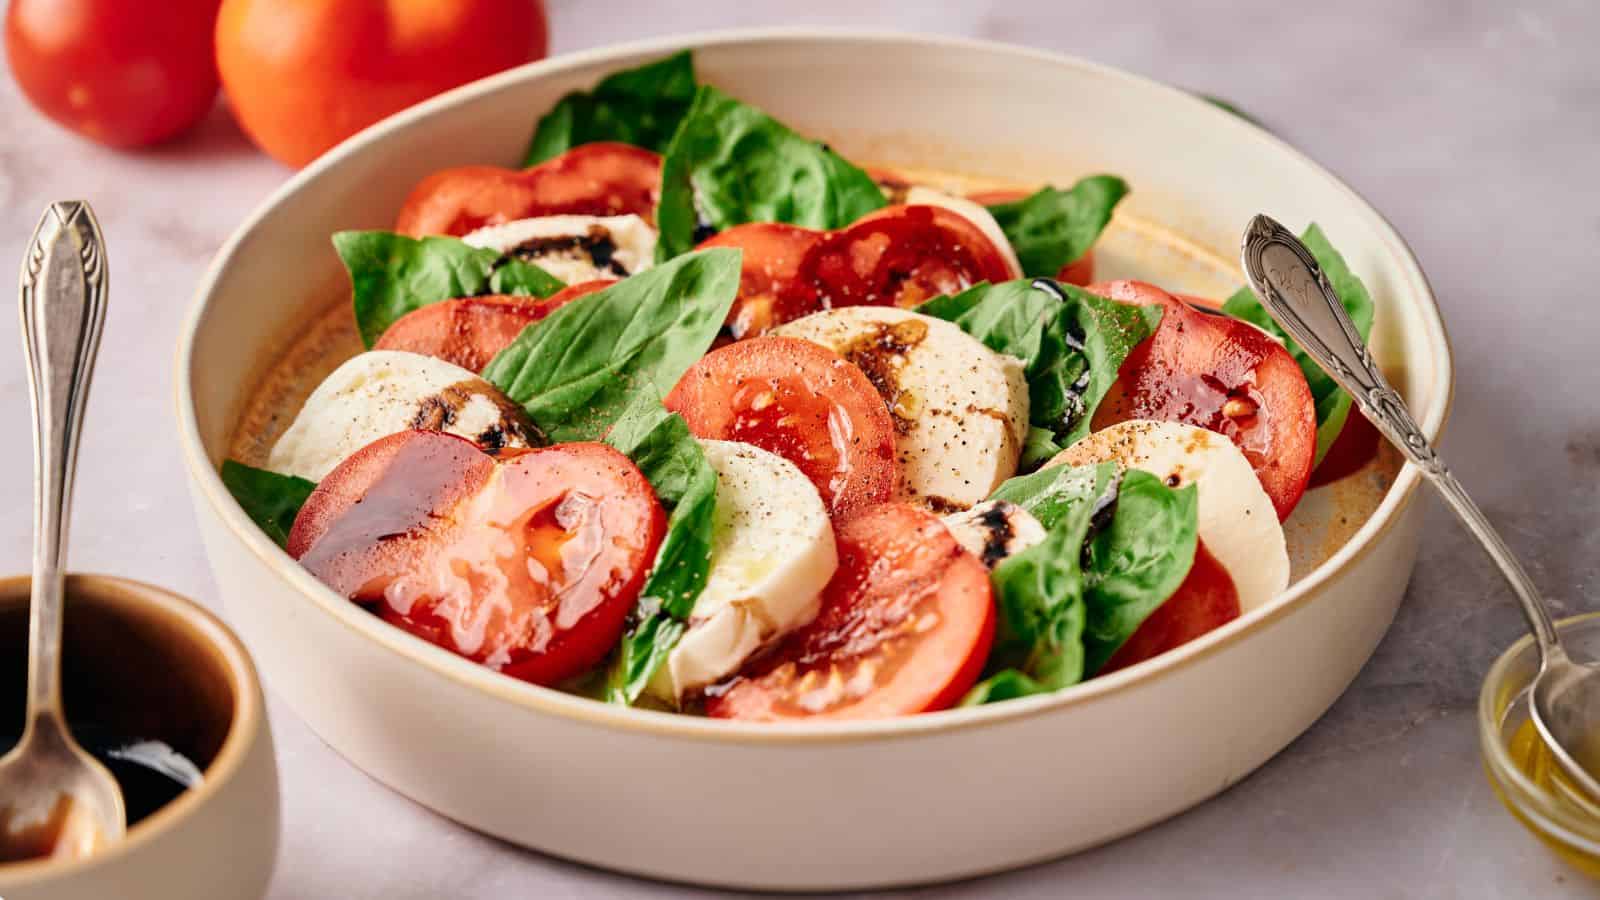 <p>Experience an Italian summer with the Easy Caprese Salad. Ripe tomatoes, fresh mozzarella, and fragrant basil are all you need. Each mouthful is a burst of Italian summer offering the perfect balance between ripe, juicy tomatoes and fresh mozzarella.<br><strong>Get the Recipe: </strong><a href="https://www.splashoftaste.com/caprese-salad/?utm_source=msn&utm_medium=page&utm_campaign=msn">Easy Caprese Salad</a></p>